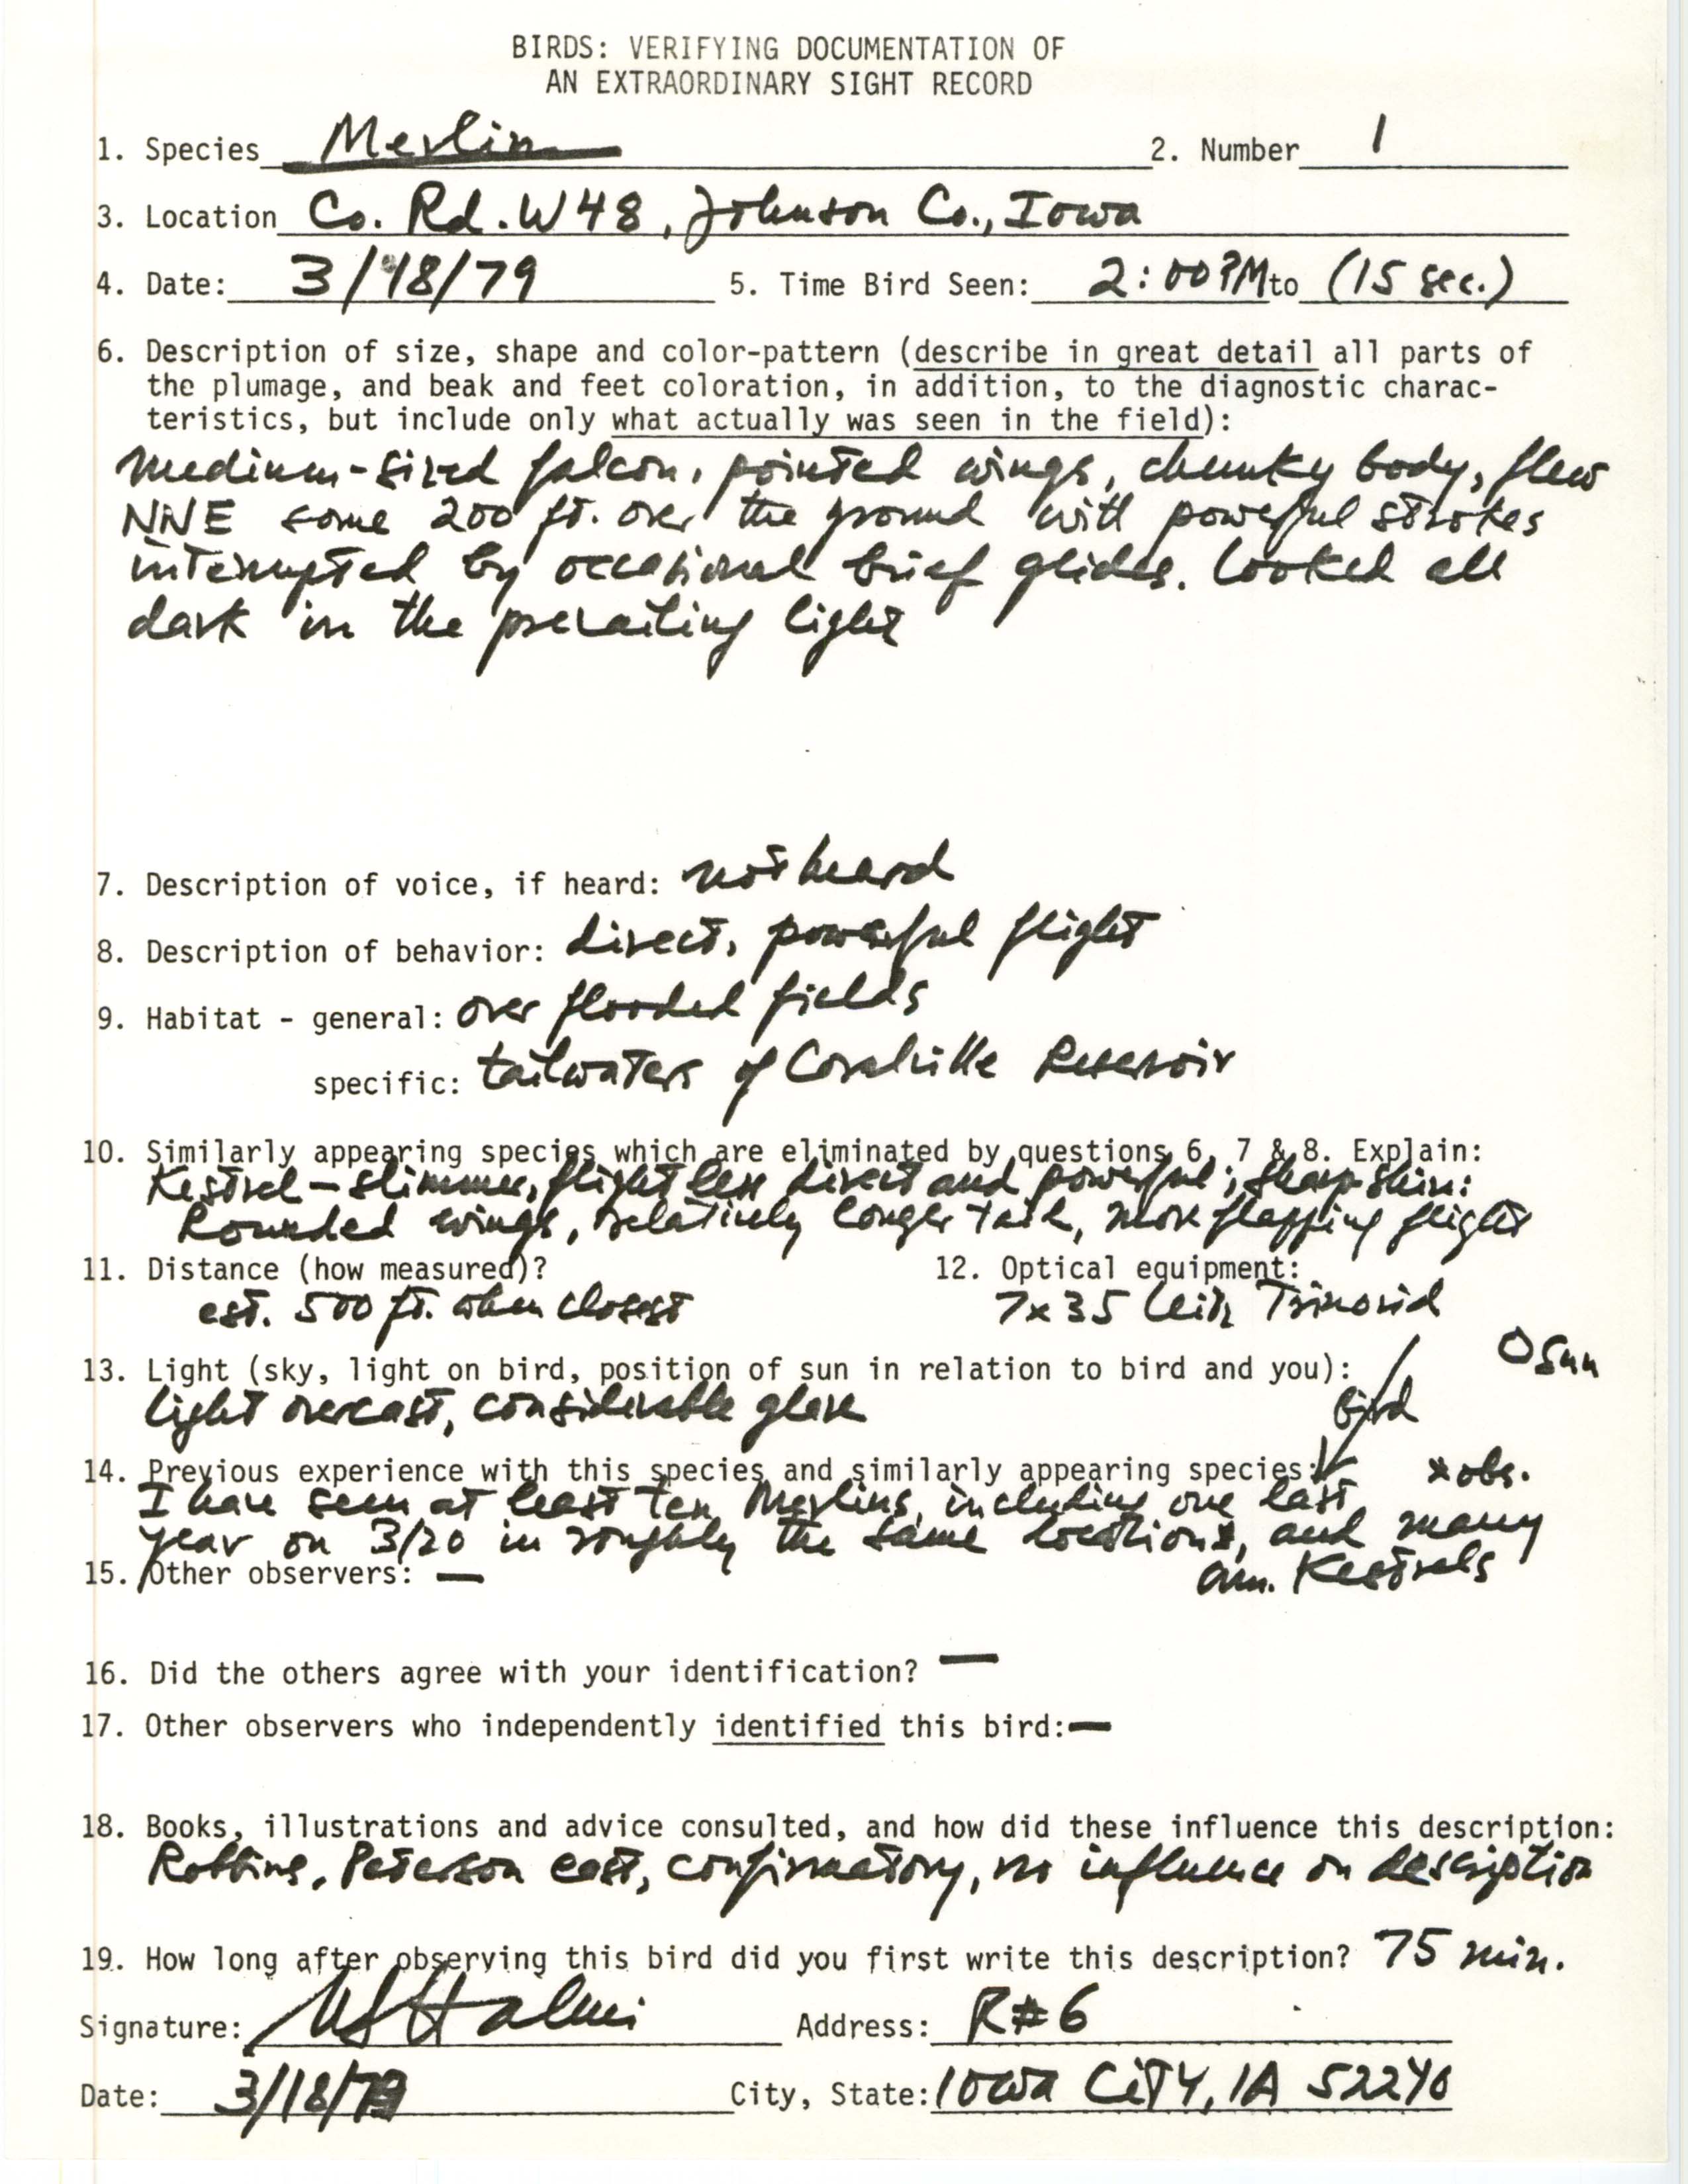 Rare bird documentation form for Merlin at Co. Rd. W48 in Johnson County, 1979